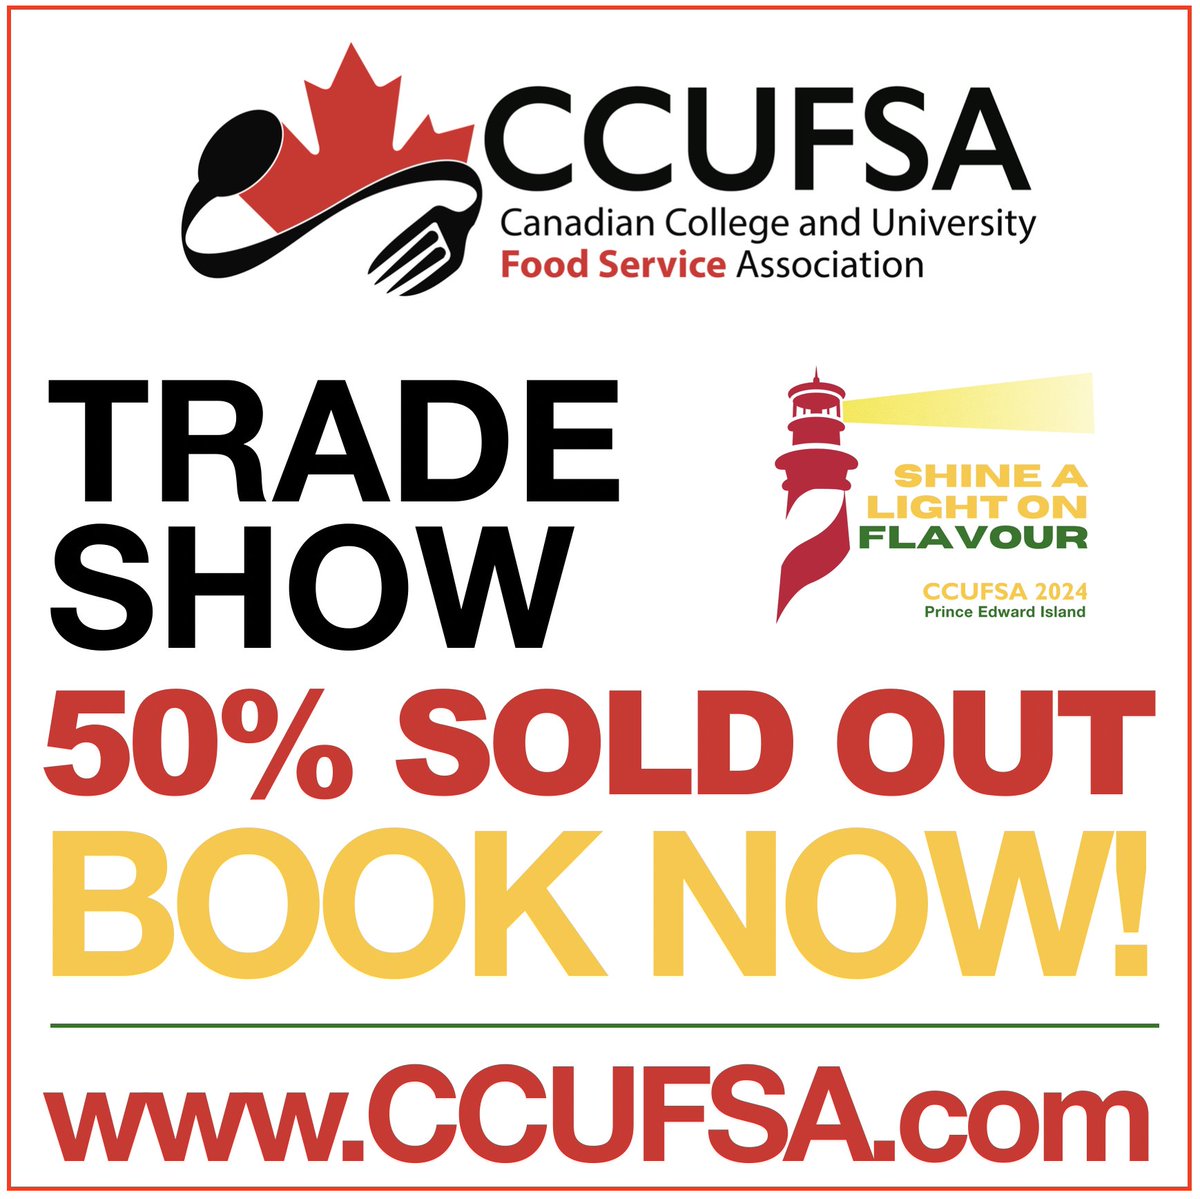 AMAZING ~ Thank you to our Associate Members!

The #CCUFSA Trade Show is 50% SOLD OUT for Thursday, June 27th in Charlottetown, PEI. #TradeShow #Foodservice #CollegeandUniversity #CCUFSA2024 Book a booth here and join us at the Annual National Conference: site.pheedloop.com/event/EVEZMTQK…